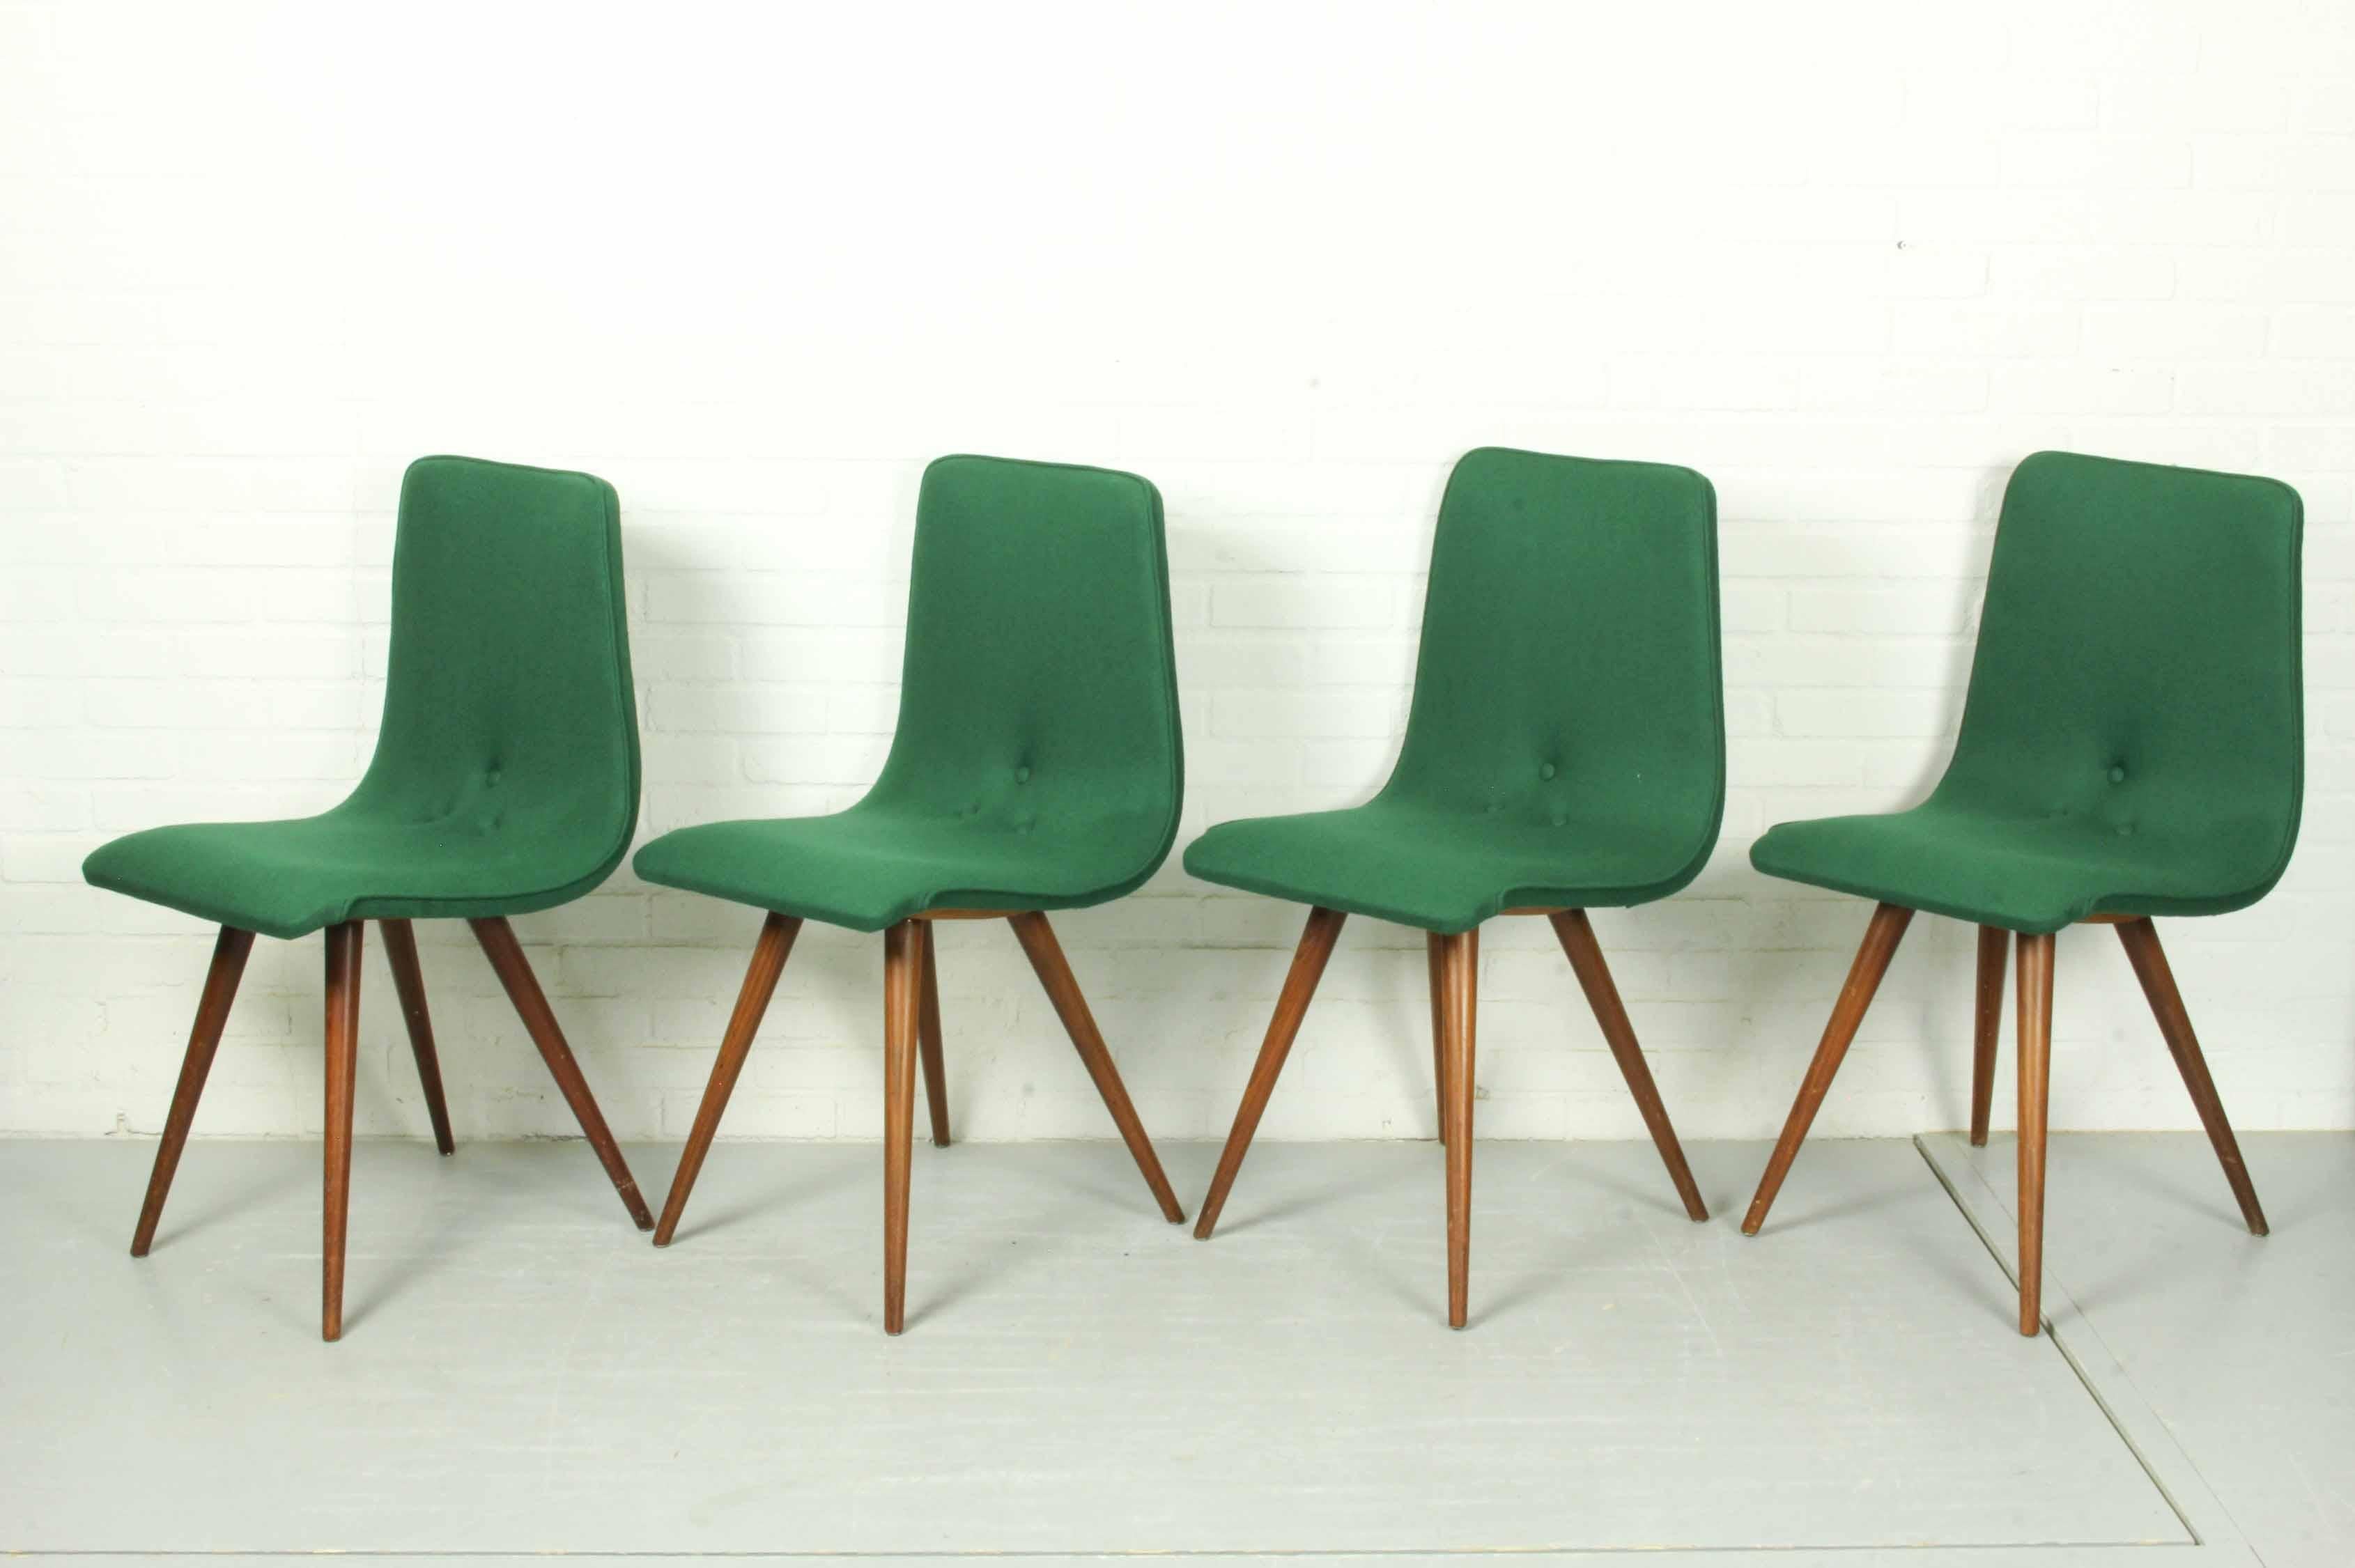 Set of 4 Teak Dining Chairs by Van Os, 1950s In Good Condition For Sale In Appeltern, Gelderland